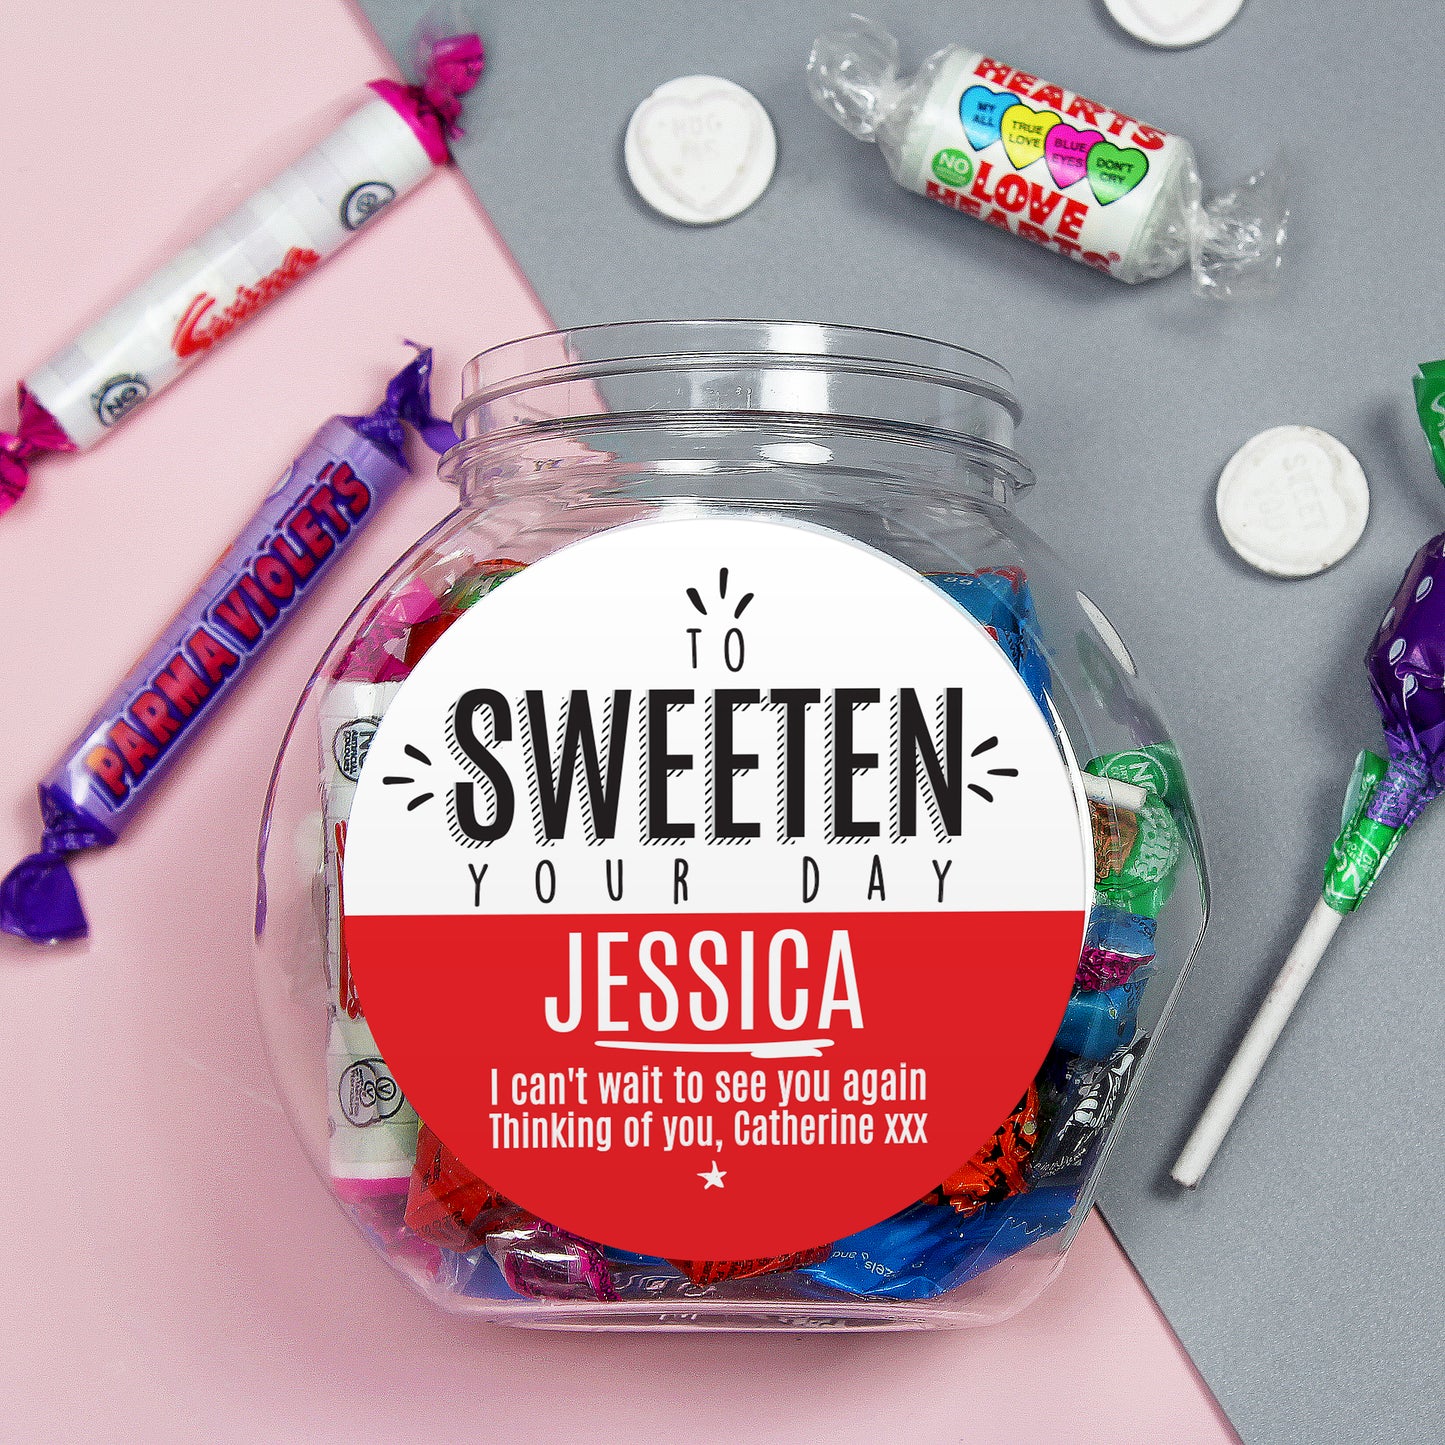 Personalised To Sweeten Your Day Sweet Jar - Personalise It!